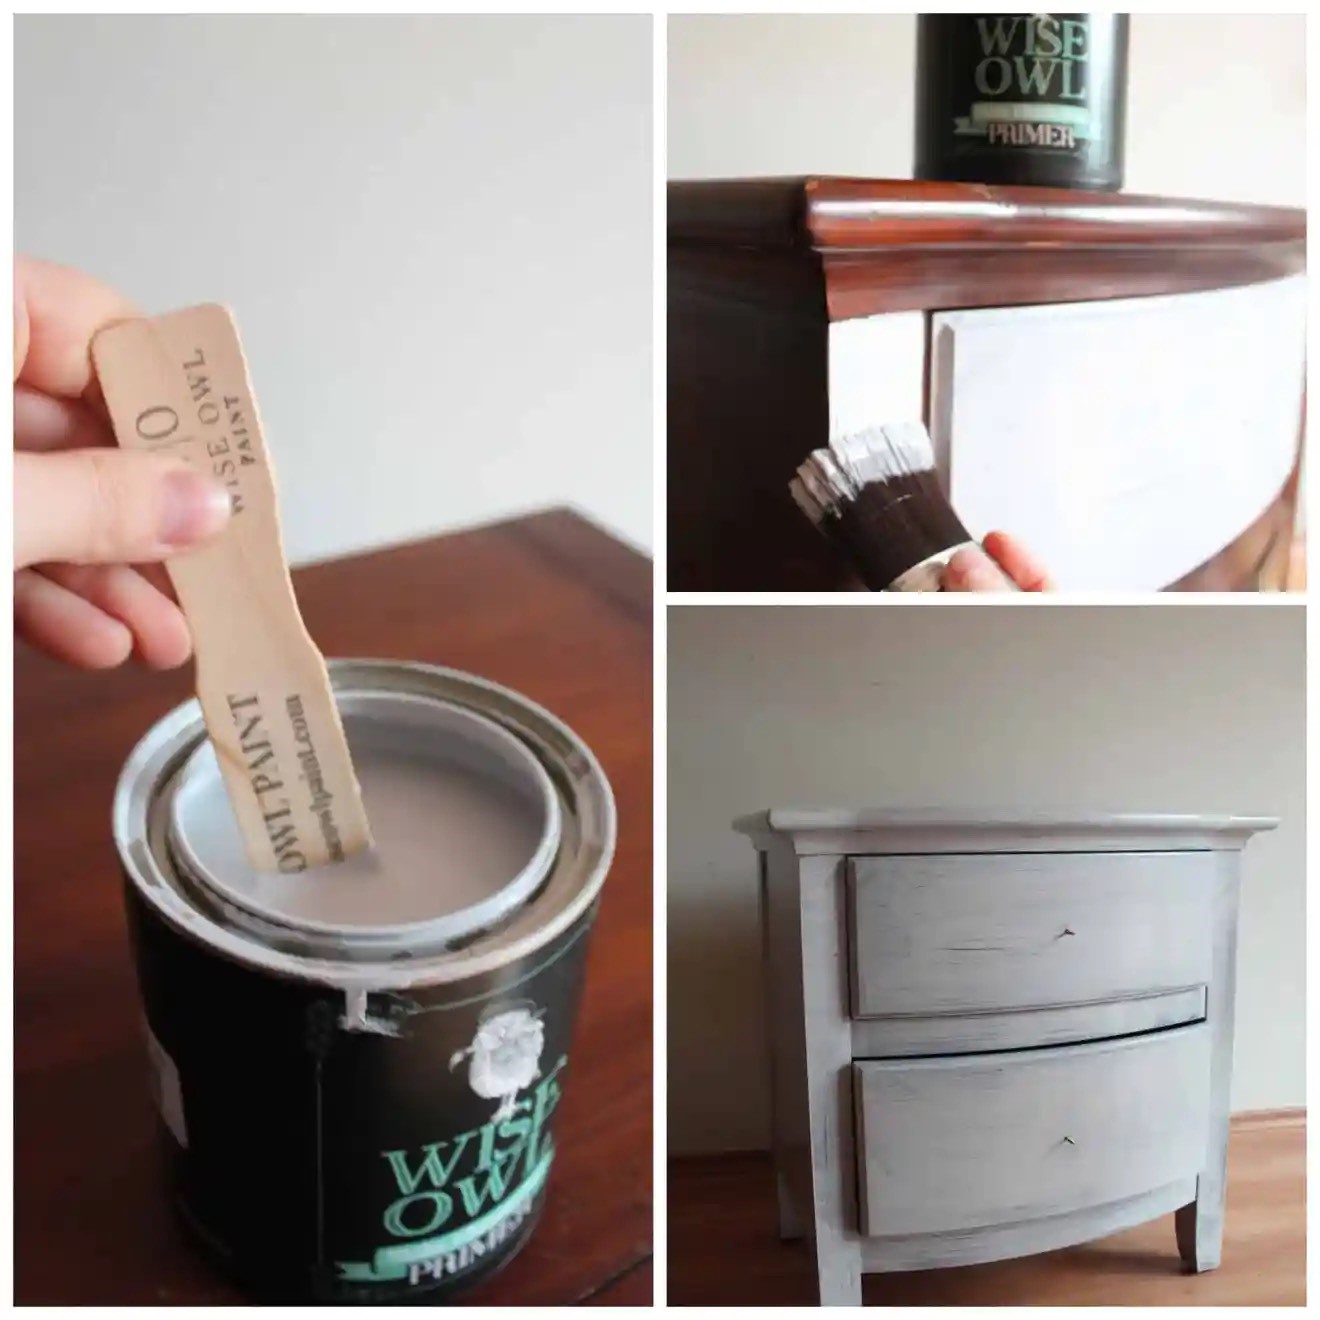 primed this nightstand with Wise Owl Paint's Stain Eliminating Primer in Gray